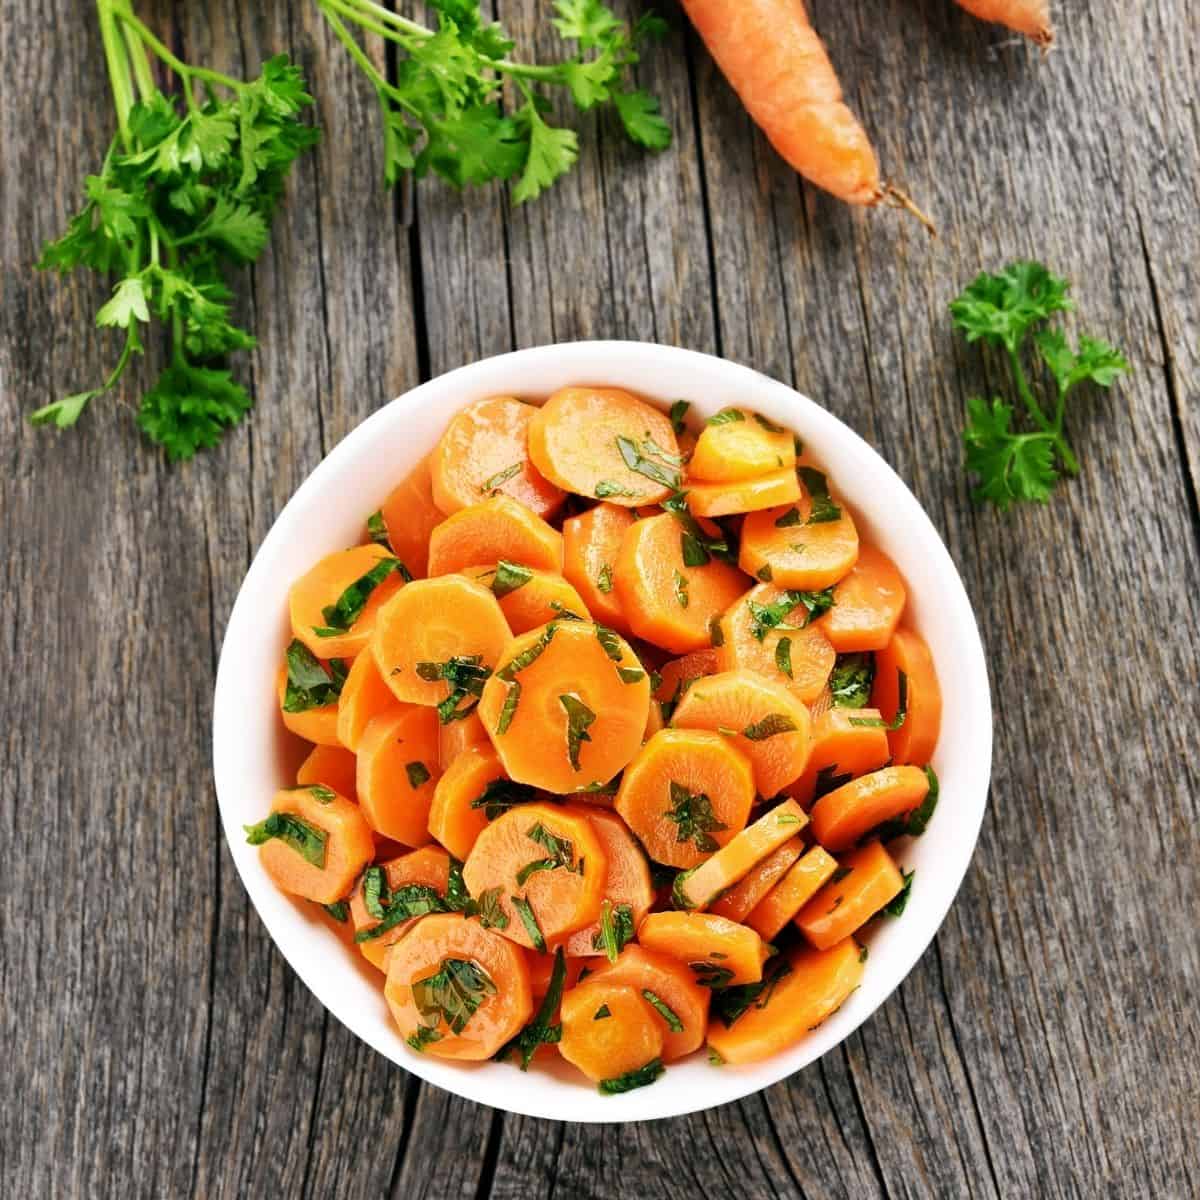 13 Outstanding Carrot Salad Recipes You Will Really Like